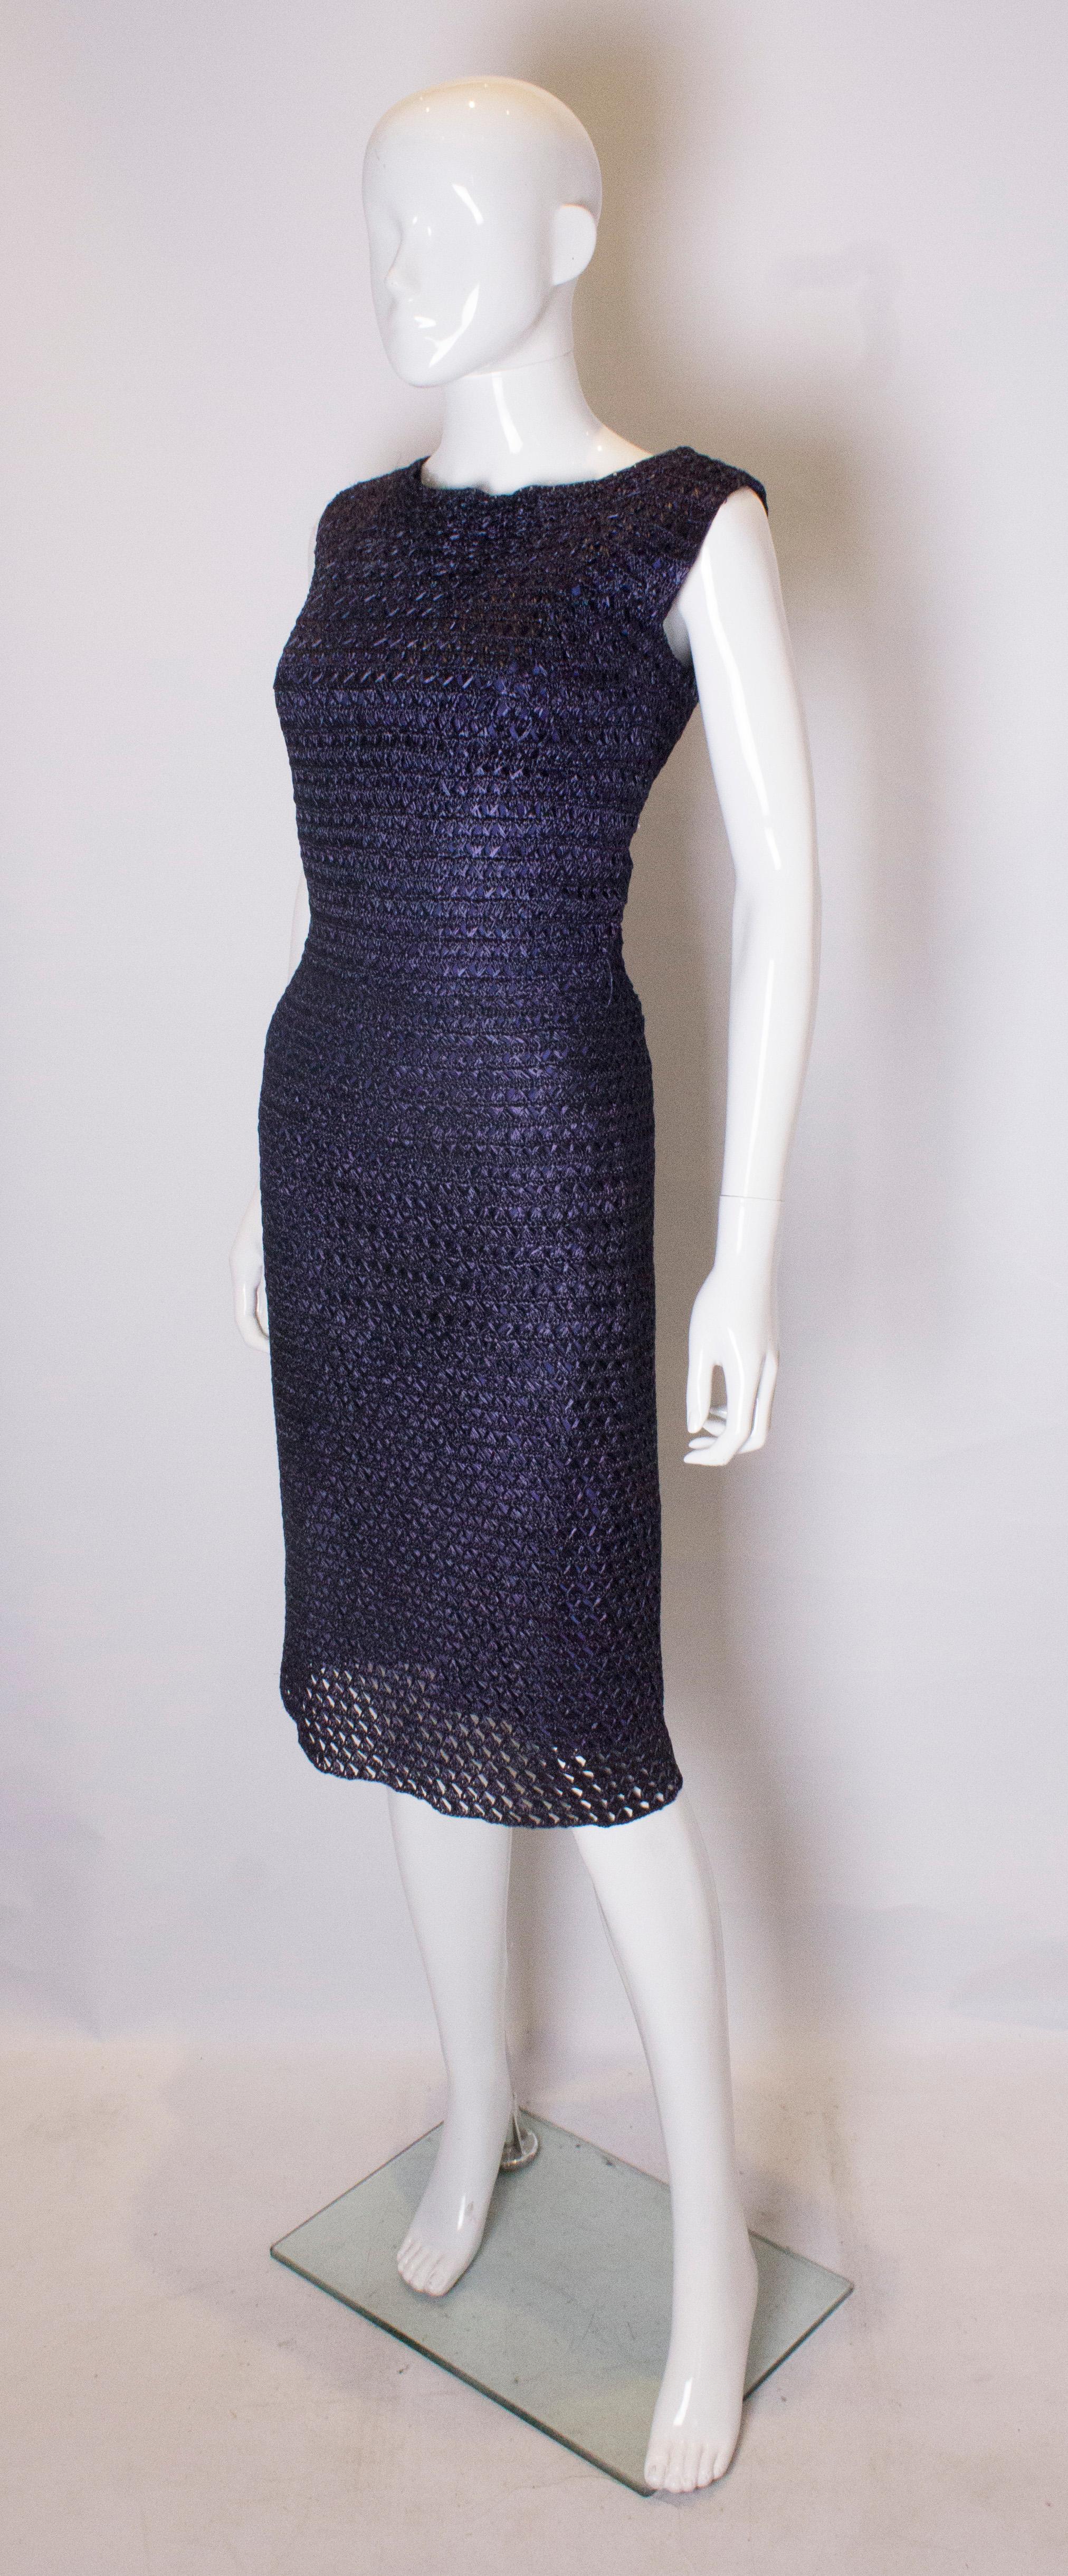 1950s Extreme Hourglass Woven Navy Blue Raffia Calf Length Cocktail Wiggle Dress im Zustand „Gut“ in London, GB